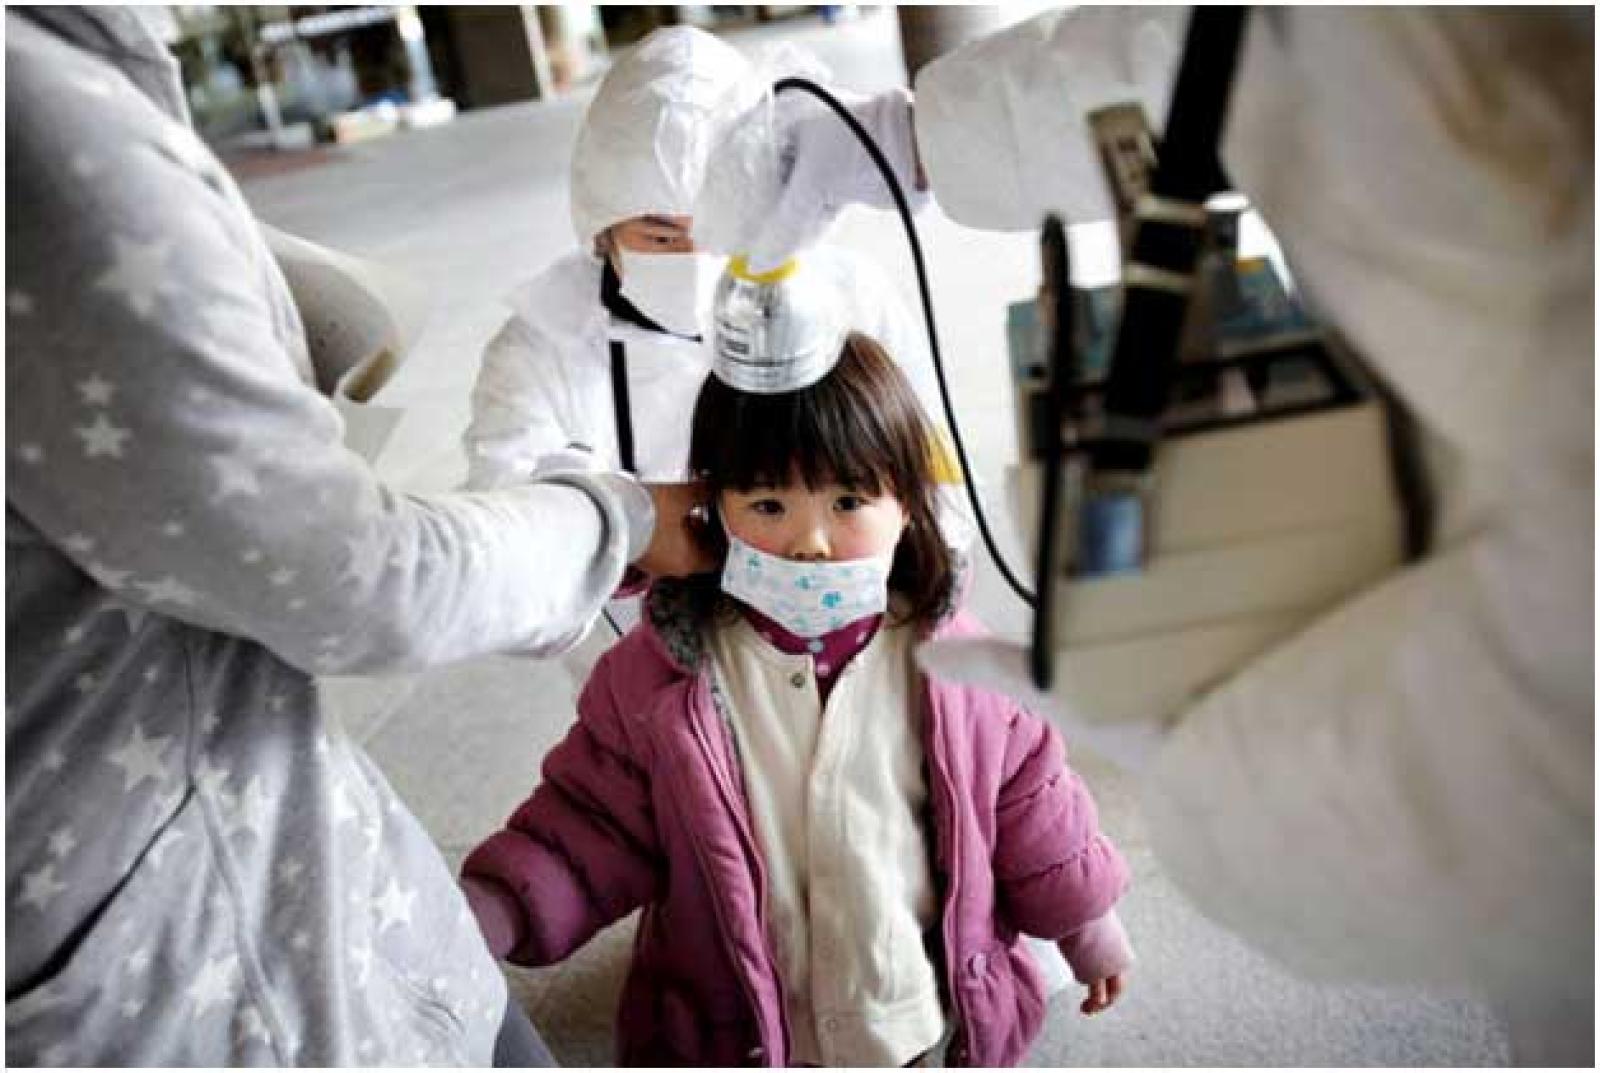 A child inspected in Fukushima prefecture, Japan